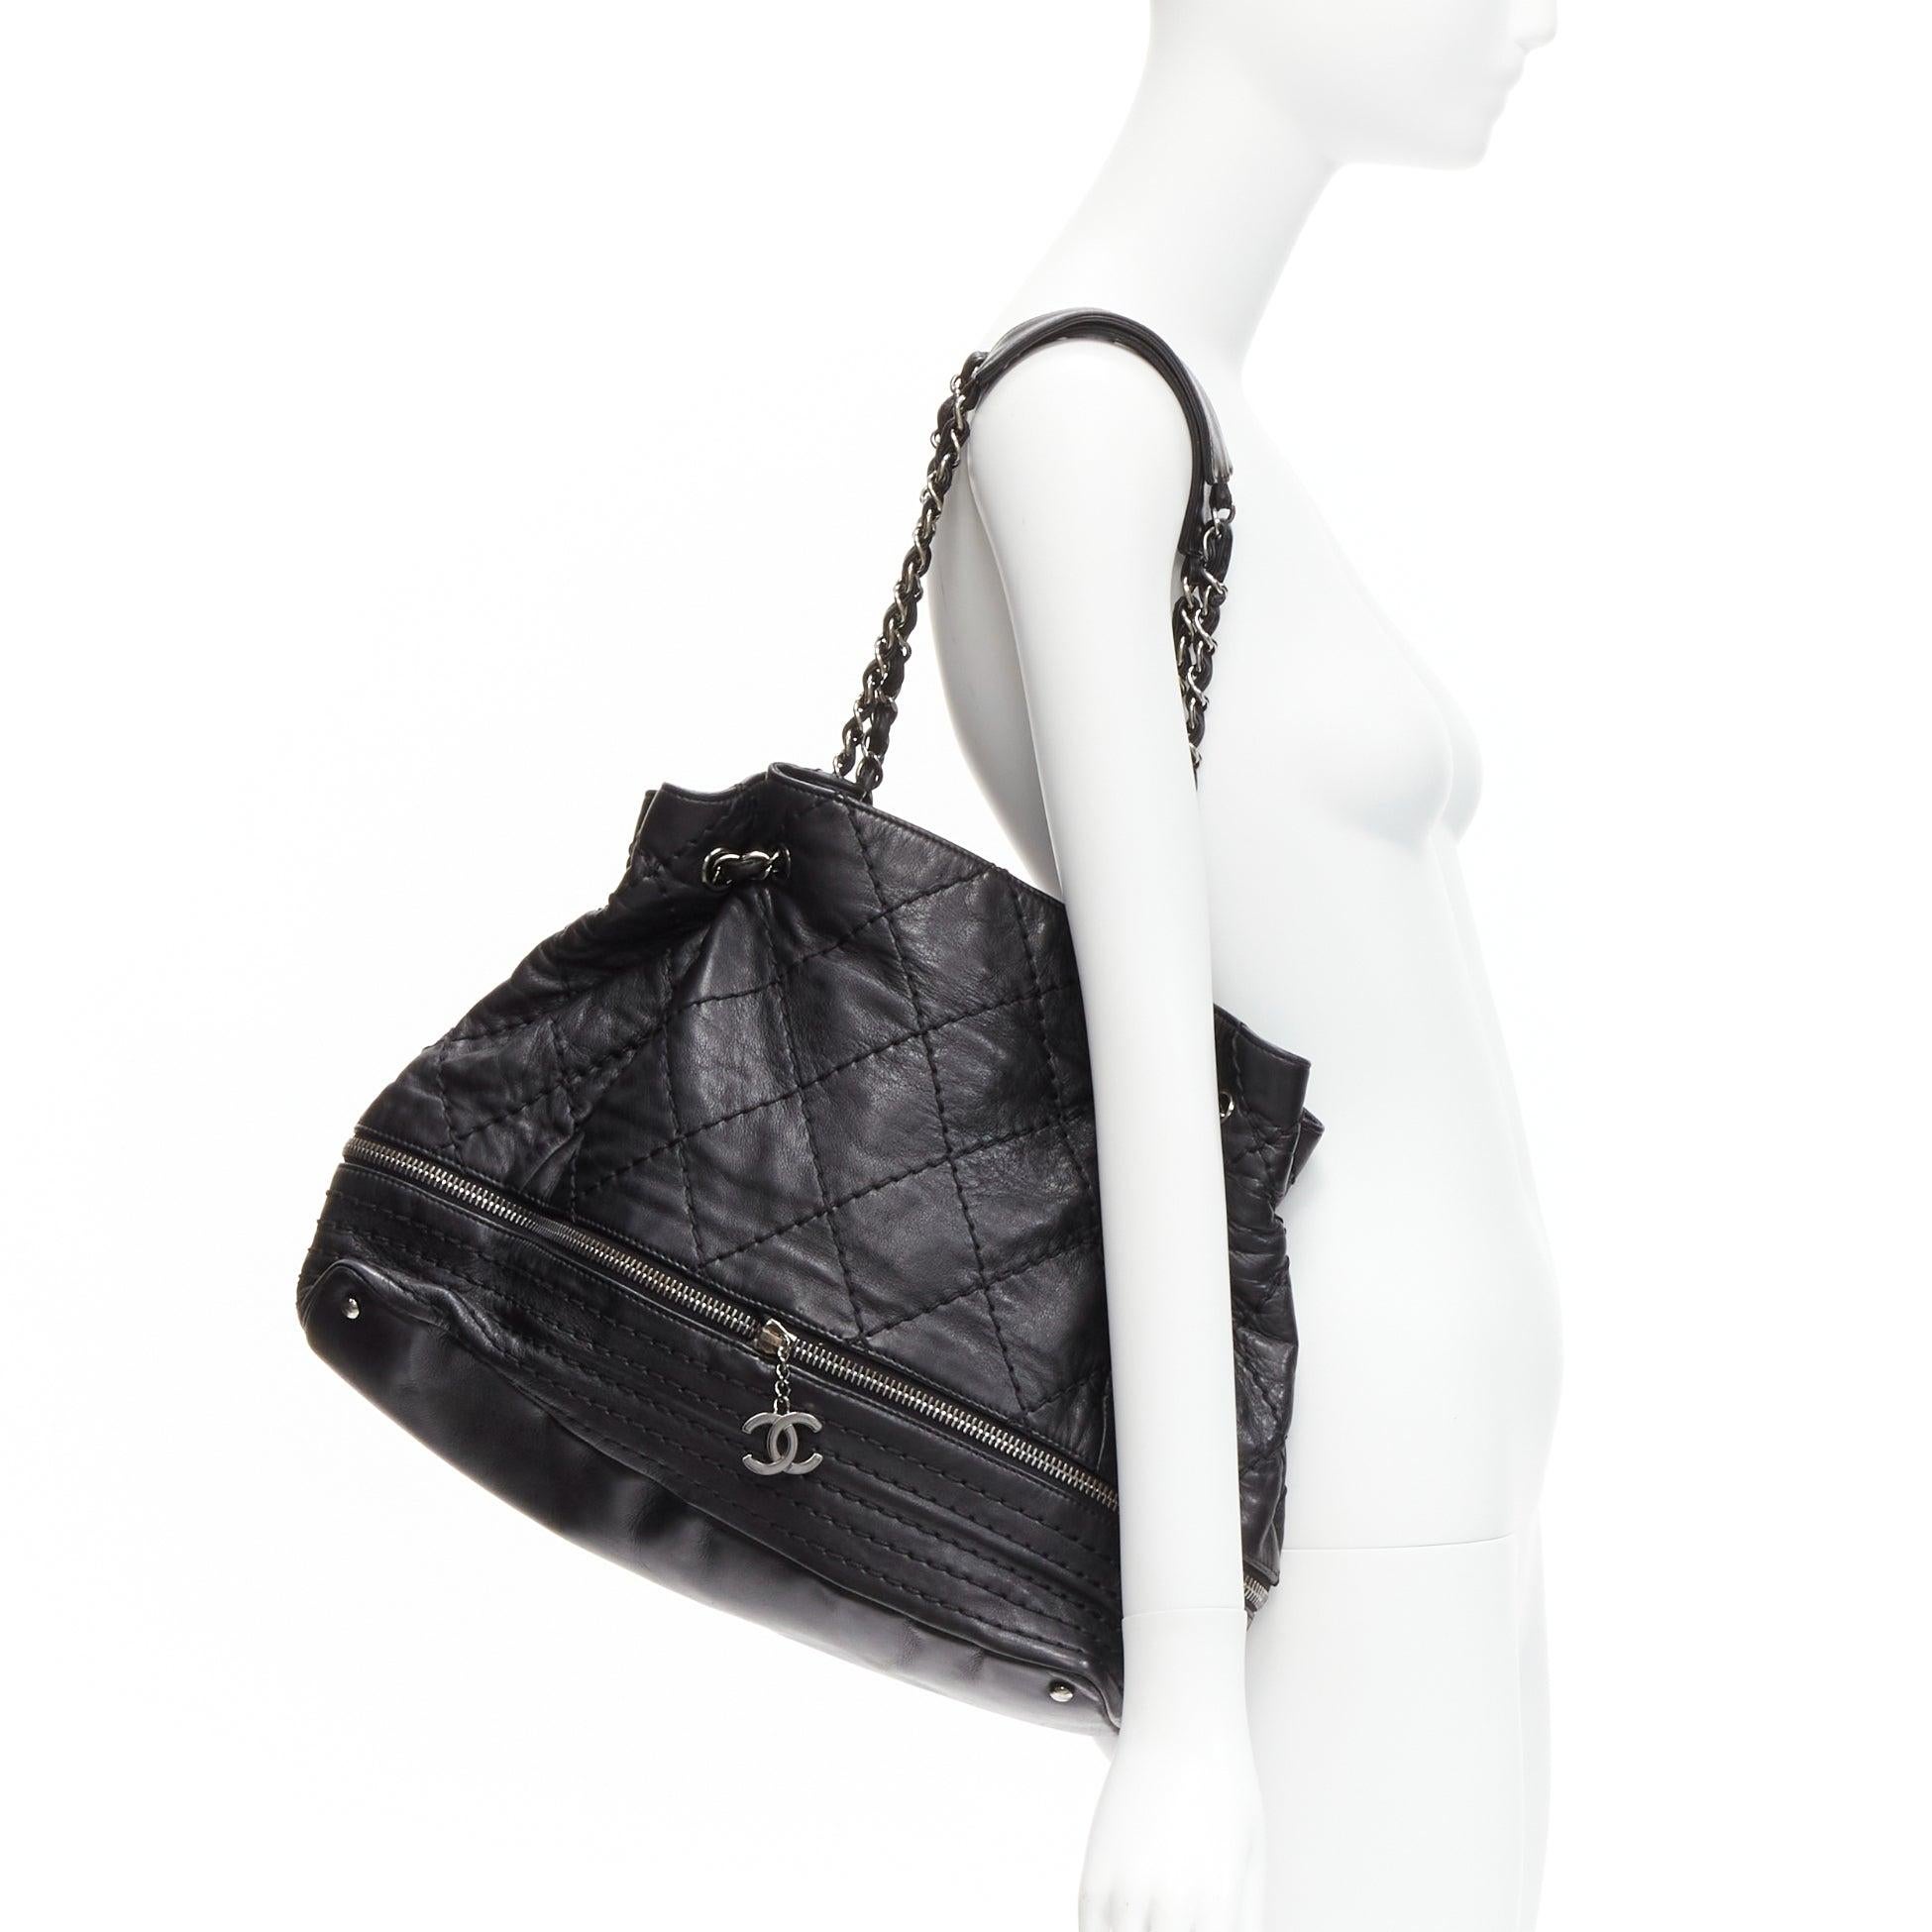 CHANEL Vintage Expandable ruthenium CC zip black quilted bucket tote bag
Reference: GIYG/A00291
Brand: Chanel
Designer: Karl Lagerfeld
Material: Leather, Metal
Color: Black
Pattern: Solid
Lining: Black Fabric
Extra Details: Zipper is functional to